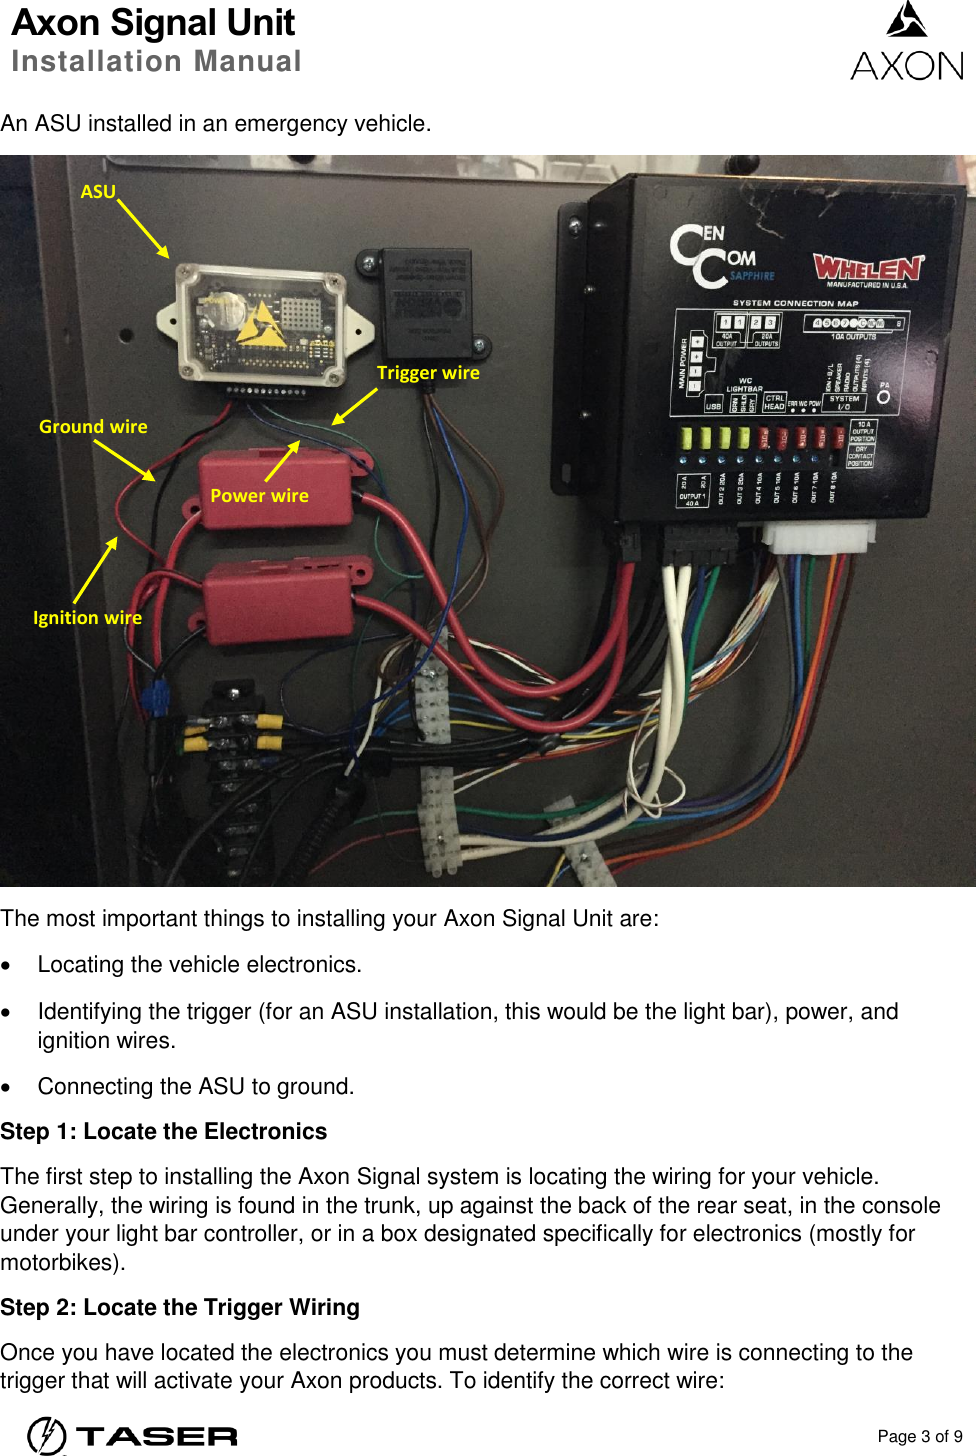 Axon Signal Unit Installation Manual    Page 3 of 9  An ASU installed in an emergency vehicle.  The most important things to installing your Axon Signal Unit are:   Locating the vehicle electronics.   Identifying the trigger (for an ASU installation, this would be the light bar), power, and ignition wires.    Connecting the ASU to ground. Step 1: Locate the Electronics The first step to installing the Axon Signal system is locating the wiring for your vehicle.  Generally, the wiring is found in the trunk, up against the back of the rear seat, in the console under your light bar controller, or in a box designated specifically for electronics (mostly for motorbikes). Step 2: Locate the Trigger Wiring Once you have located the electronics you must determine which wire is connecting to the trigger that will activate your Axon products. To identify the correct wire: ASU Trigger wire Power wire Ground wire Ignition wire 